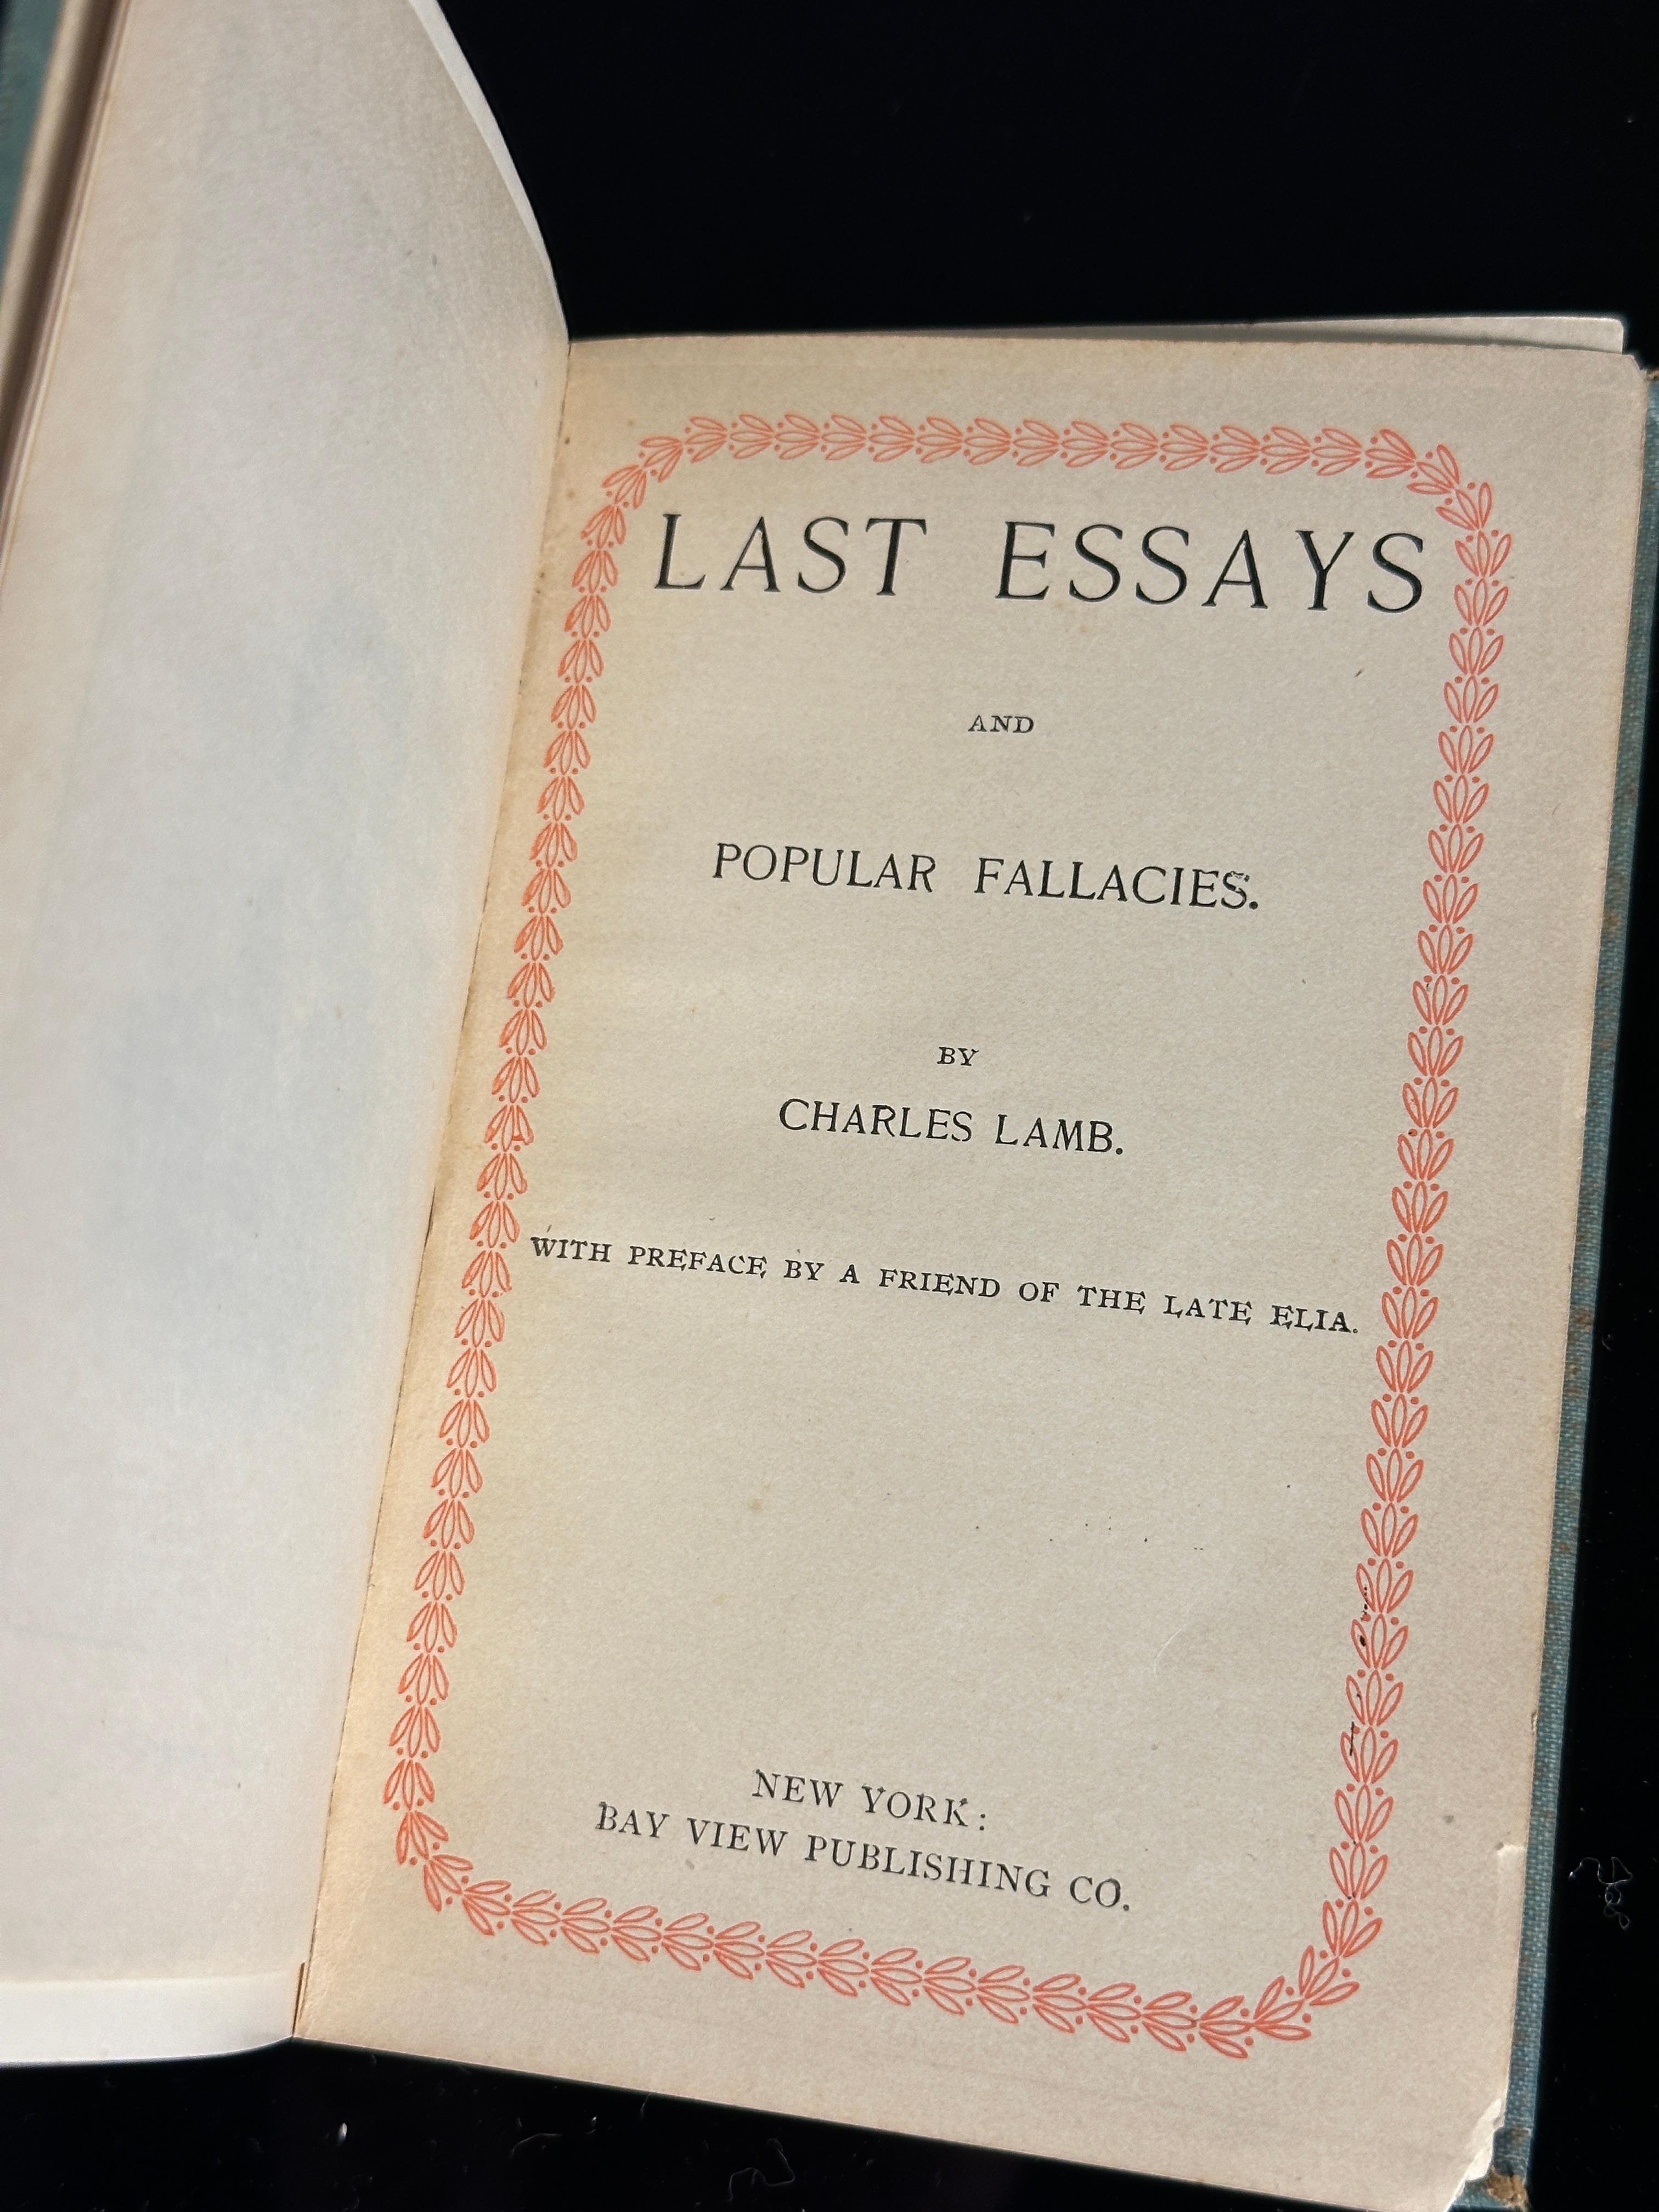 "Last Essays and Popular Fallacies" by Charles Lamb